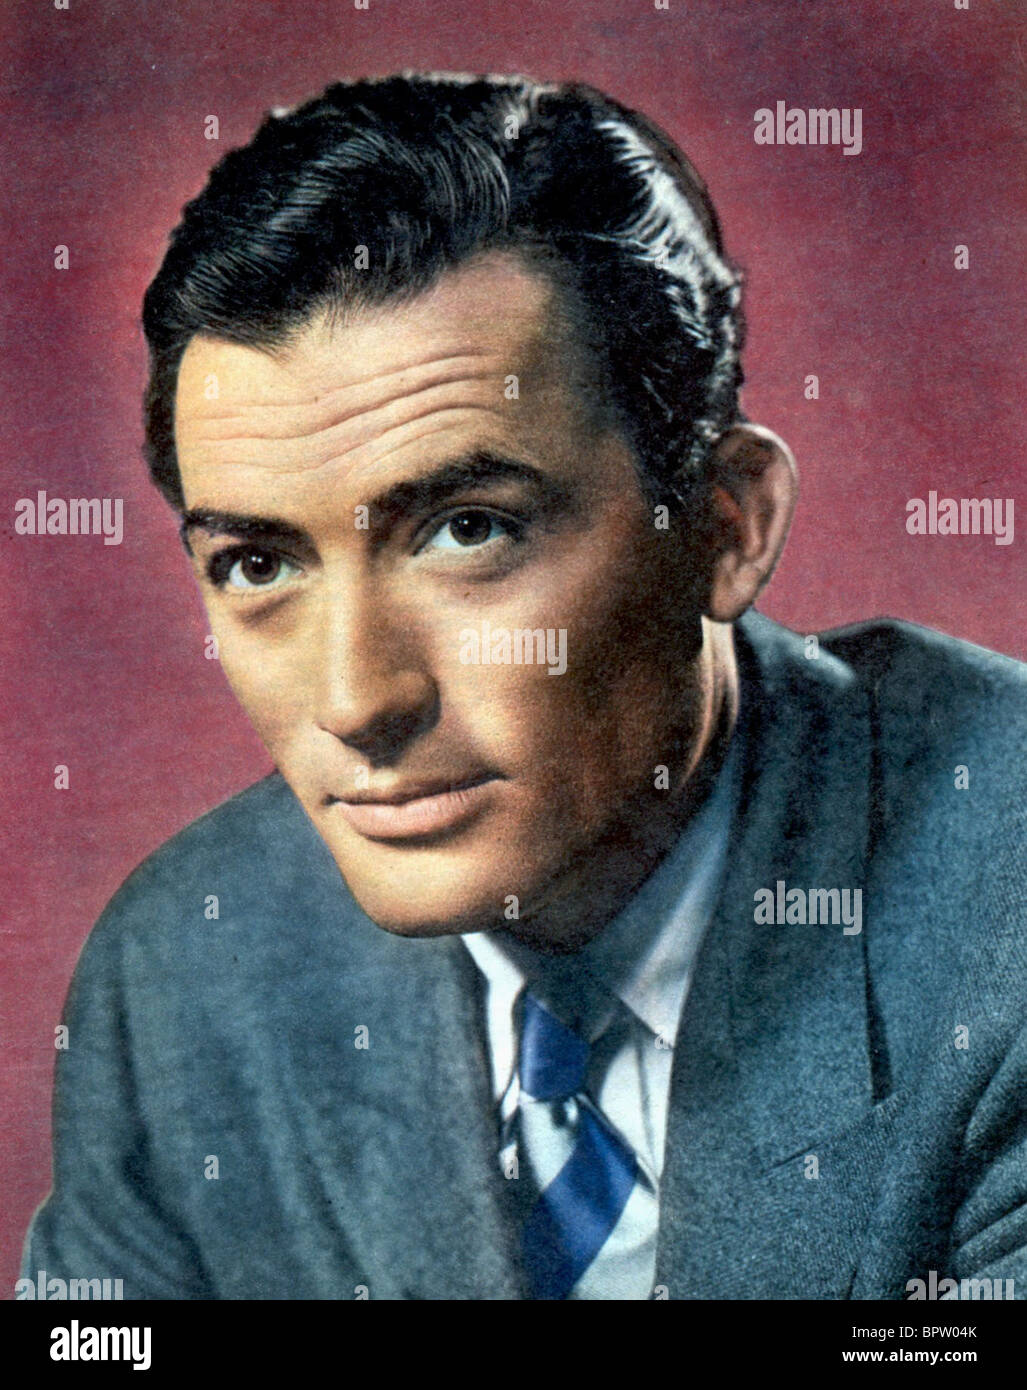 GREGORY PECK ACTOR (1952) Stock Photo